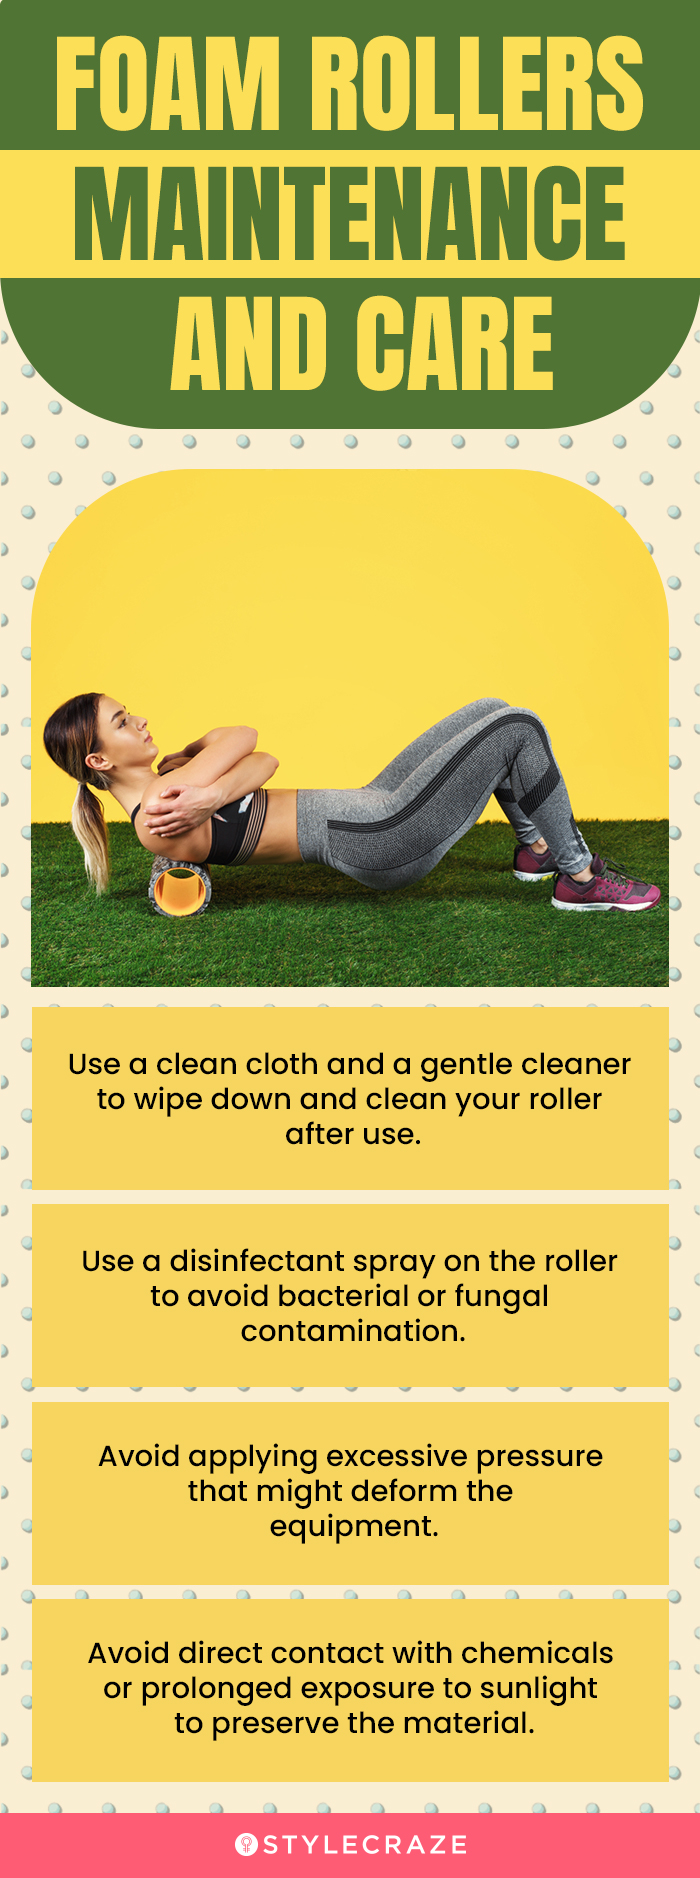 Foam Rollers Maintenance And Care (infographic)